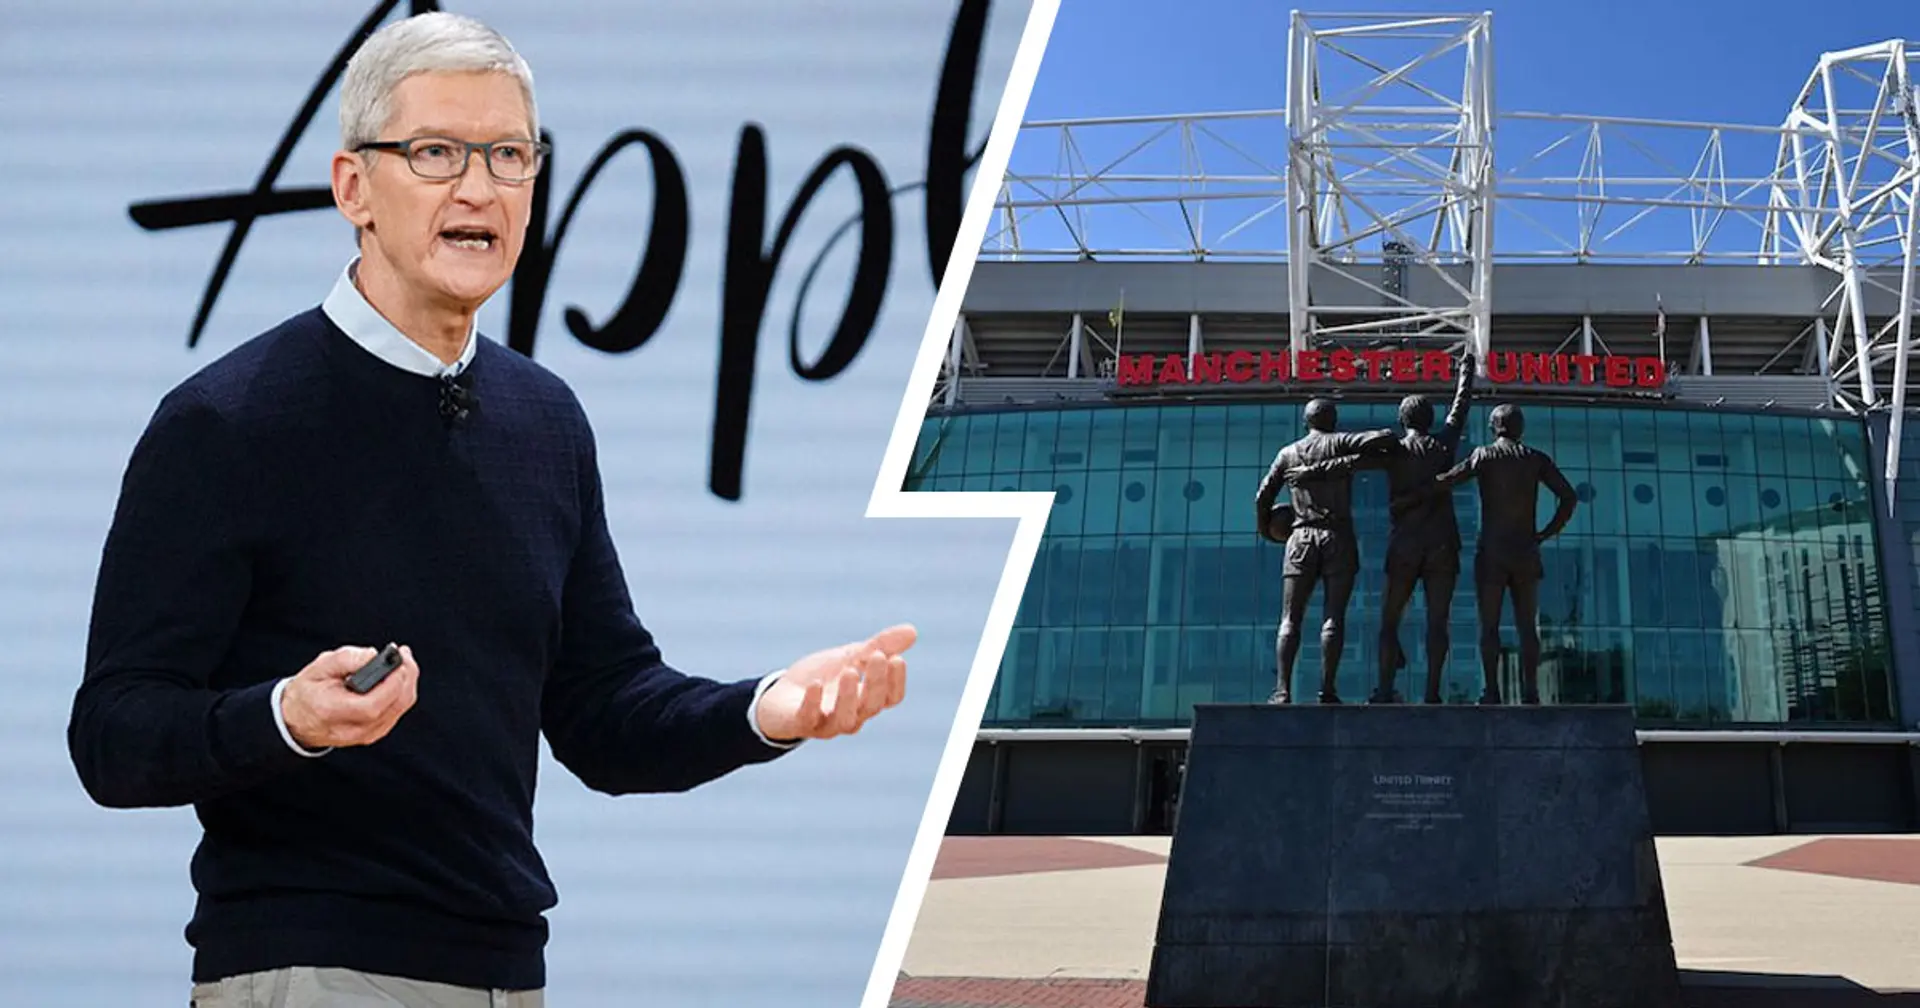 Apple interested in making Manchester United 'world's richest club' with takeover - possible offer revealed